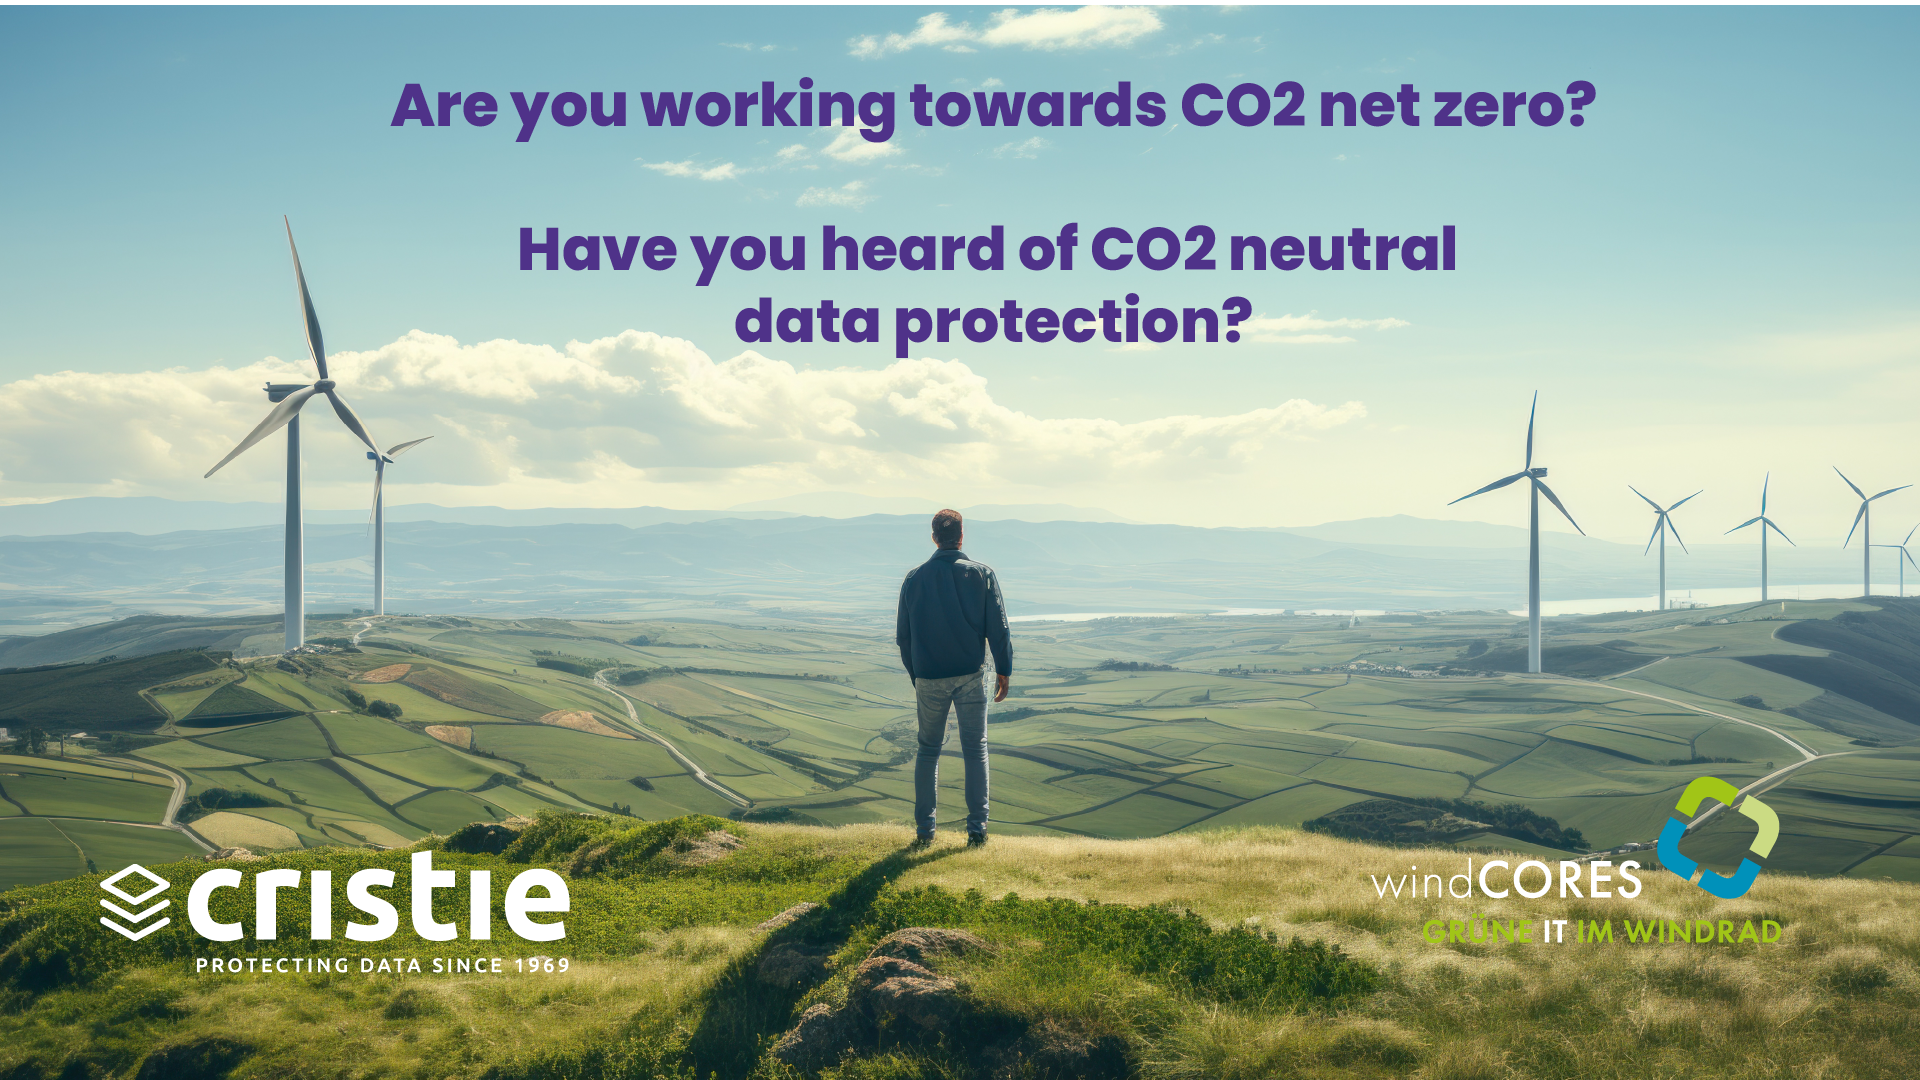 Have you heard of CO2 neutral data protection?